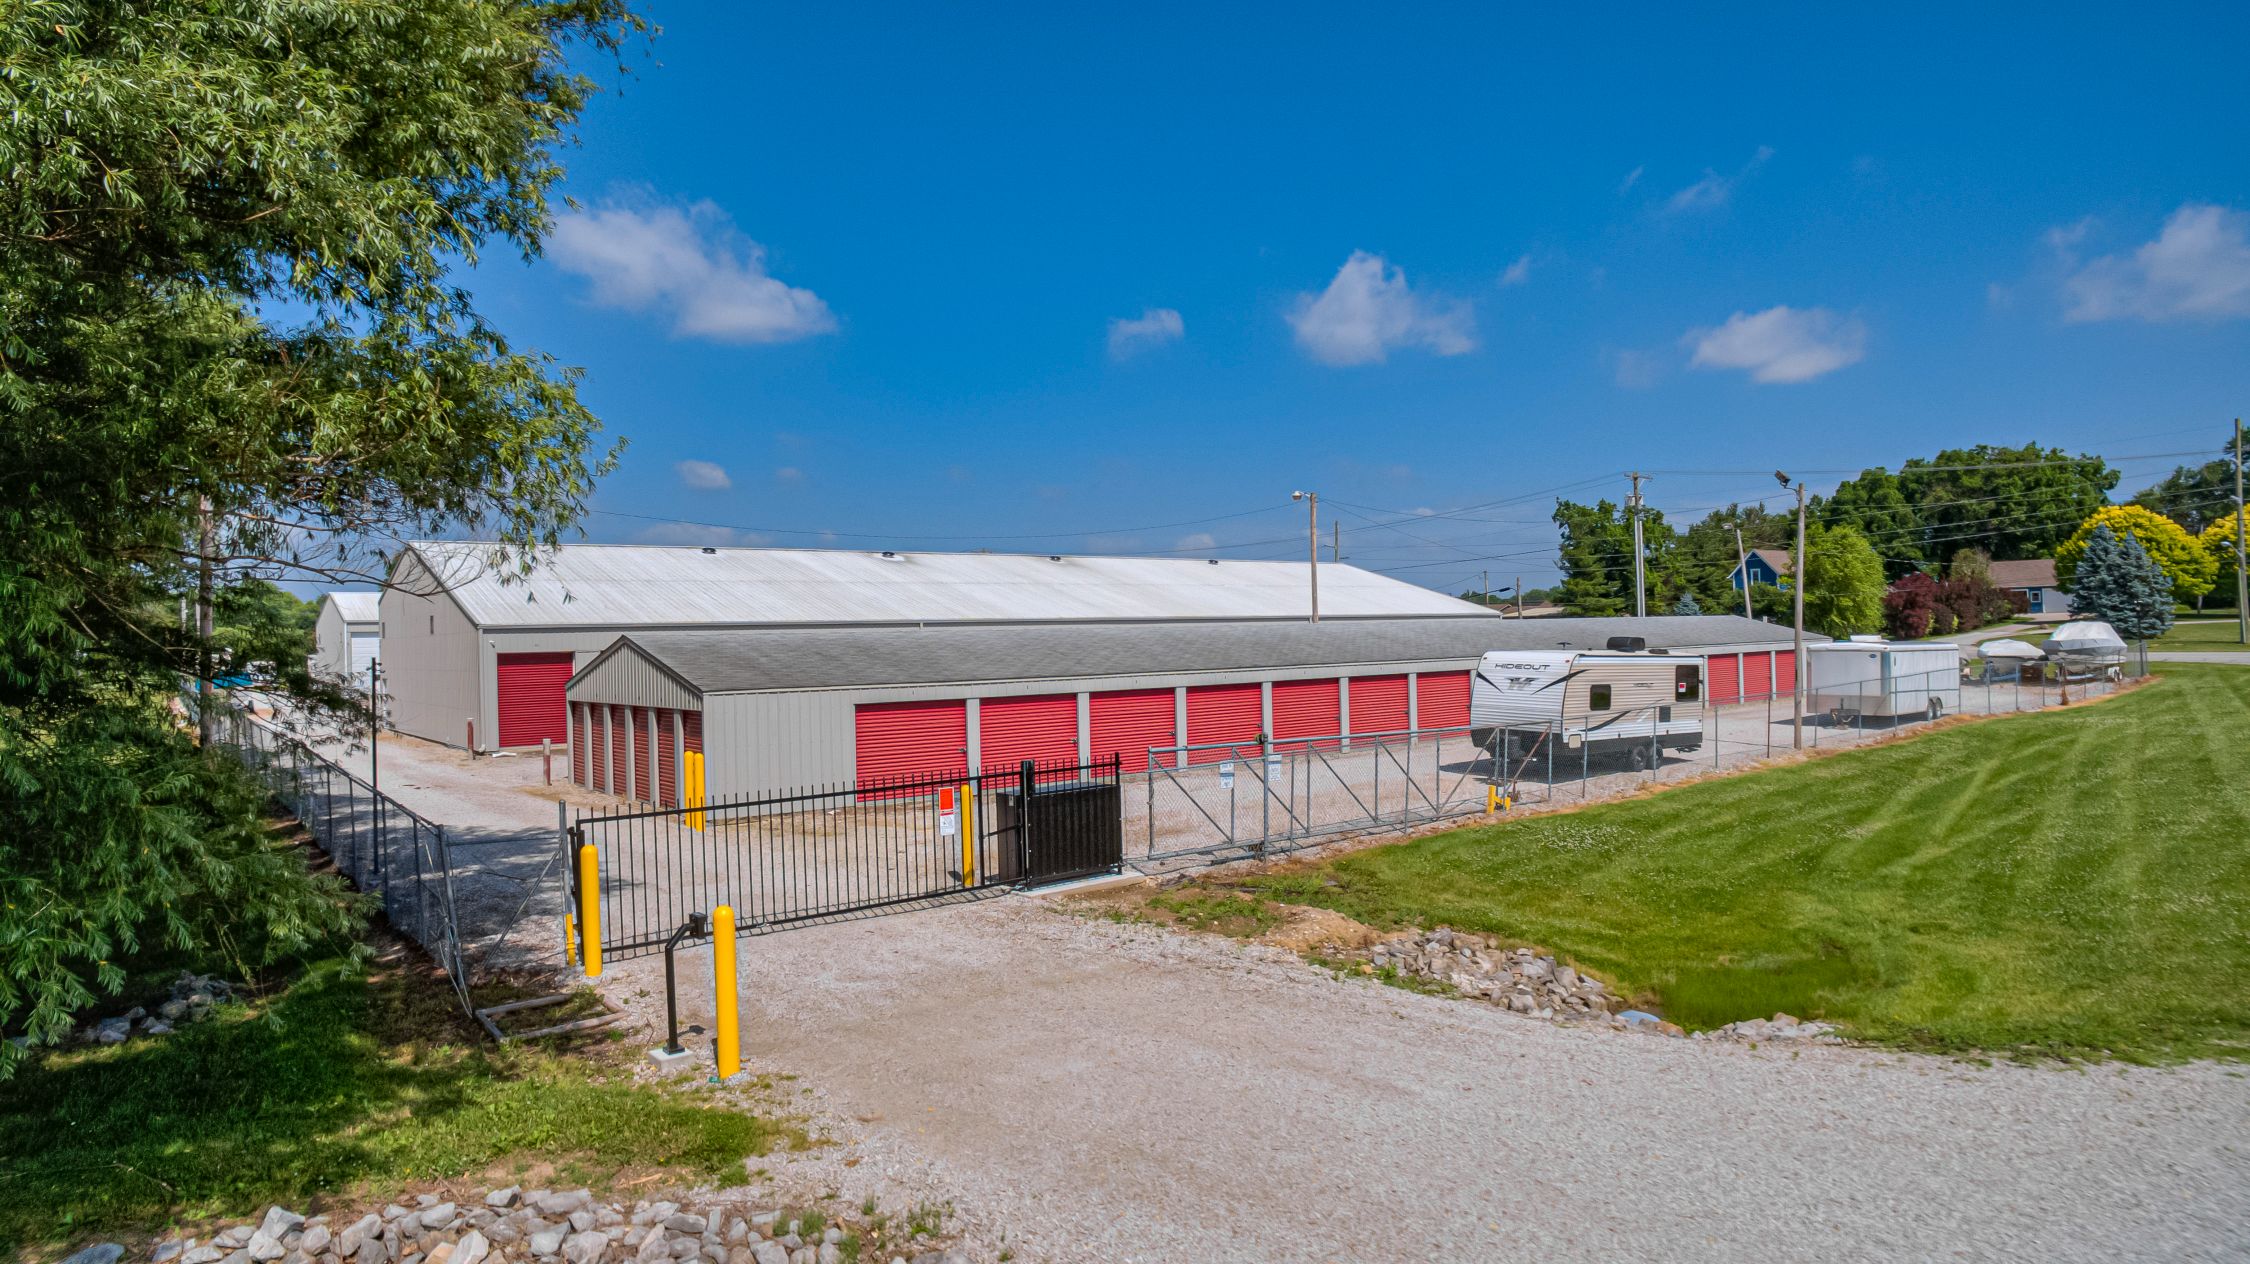 Danville Indiana storage gate access for storage units and vehicle parking